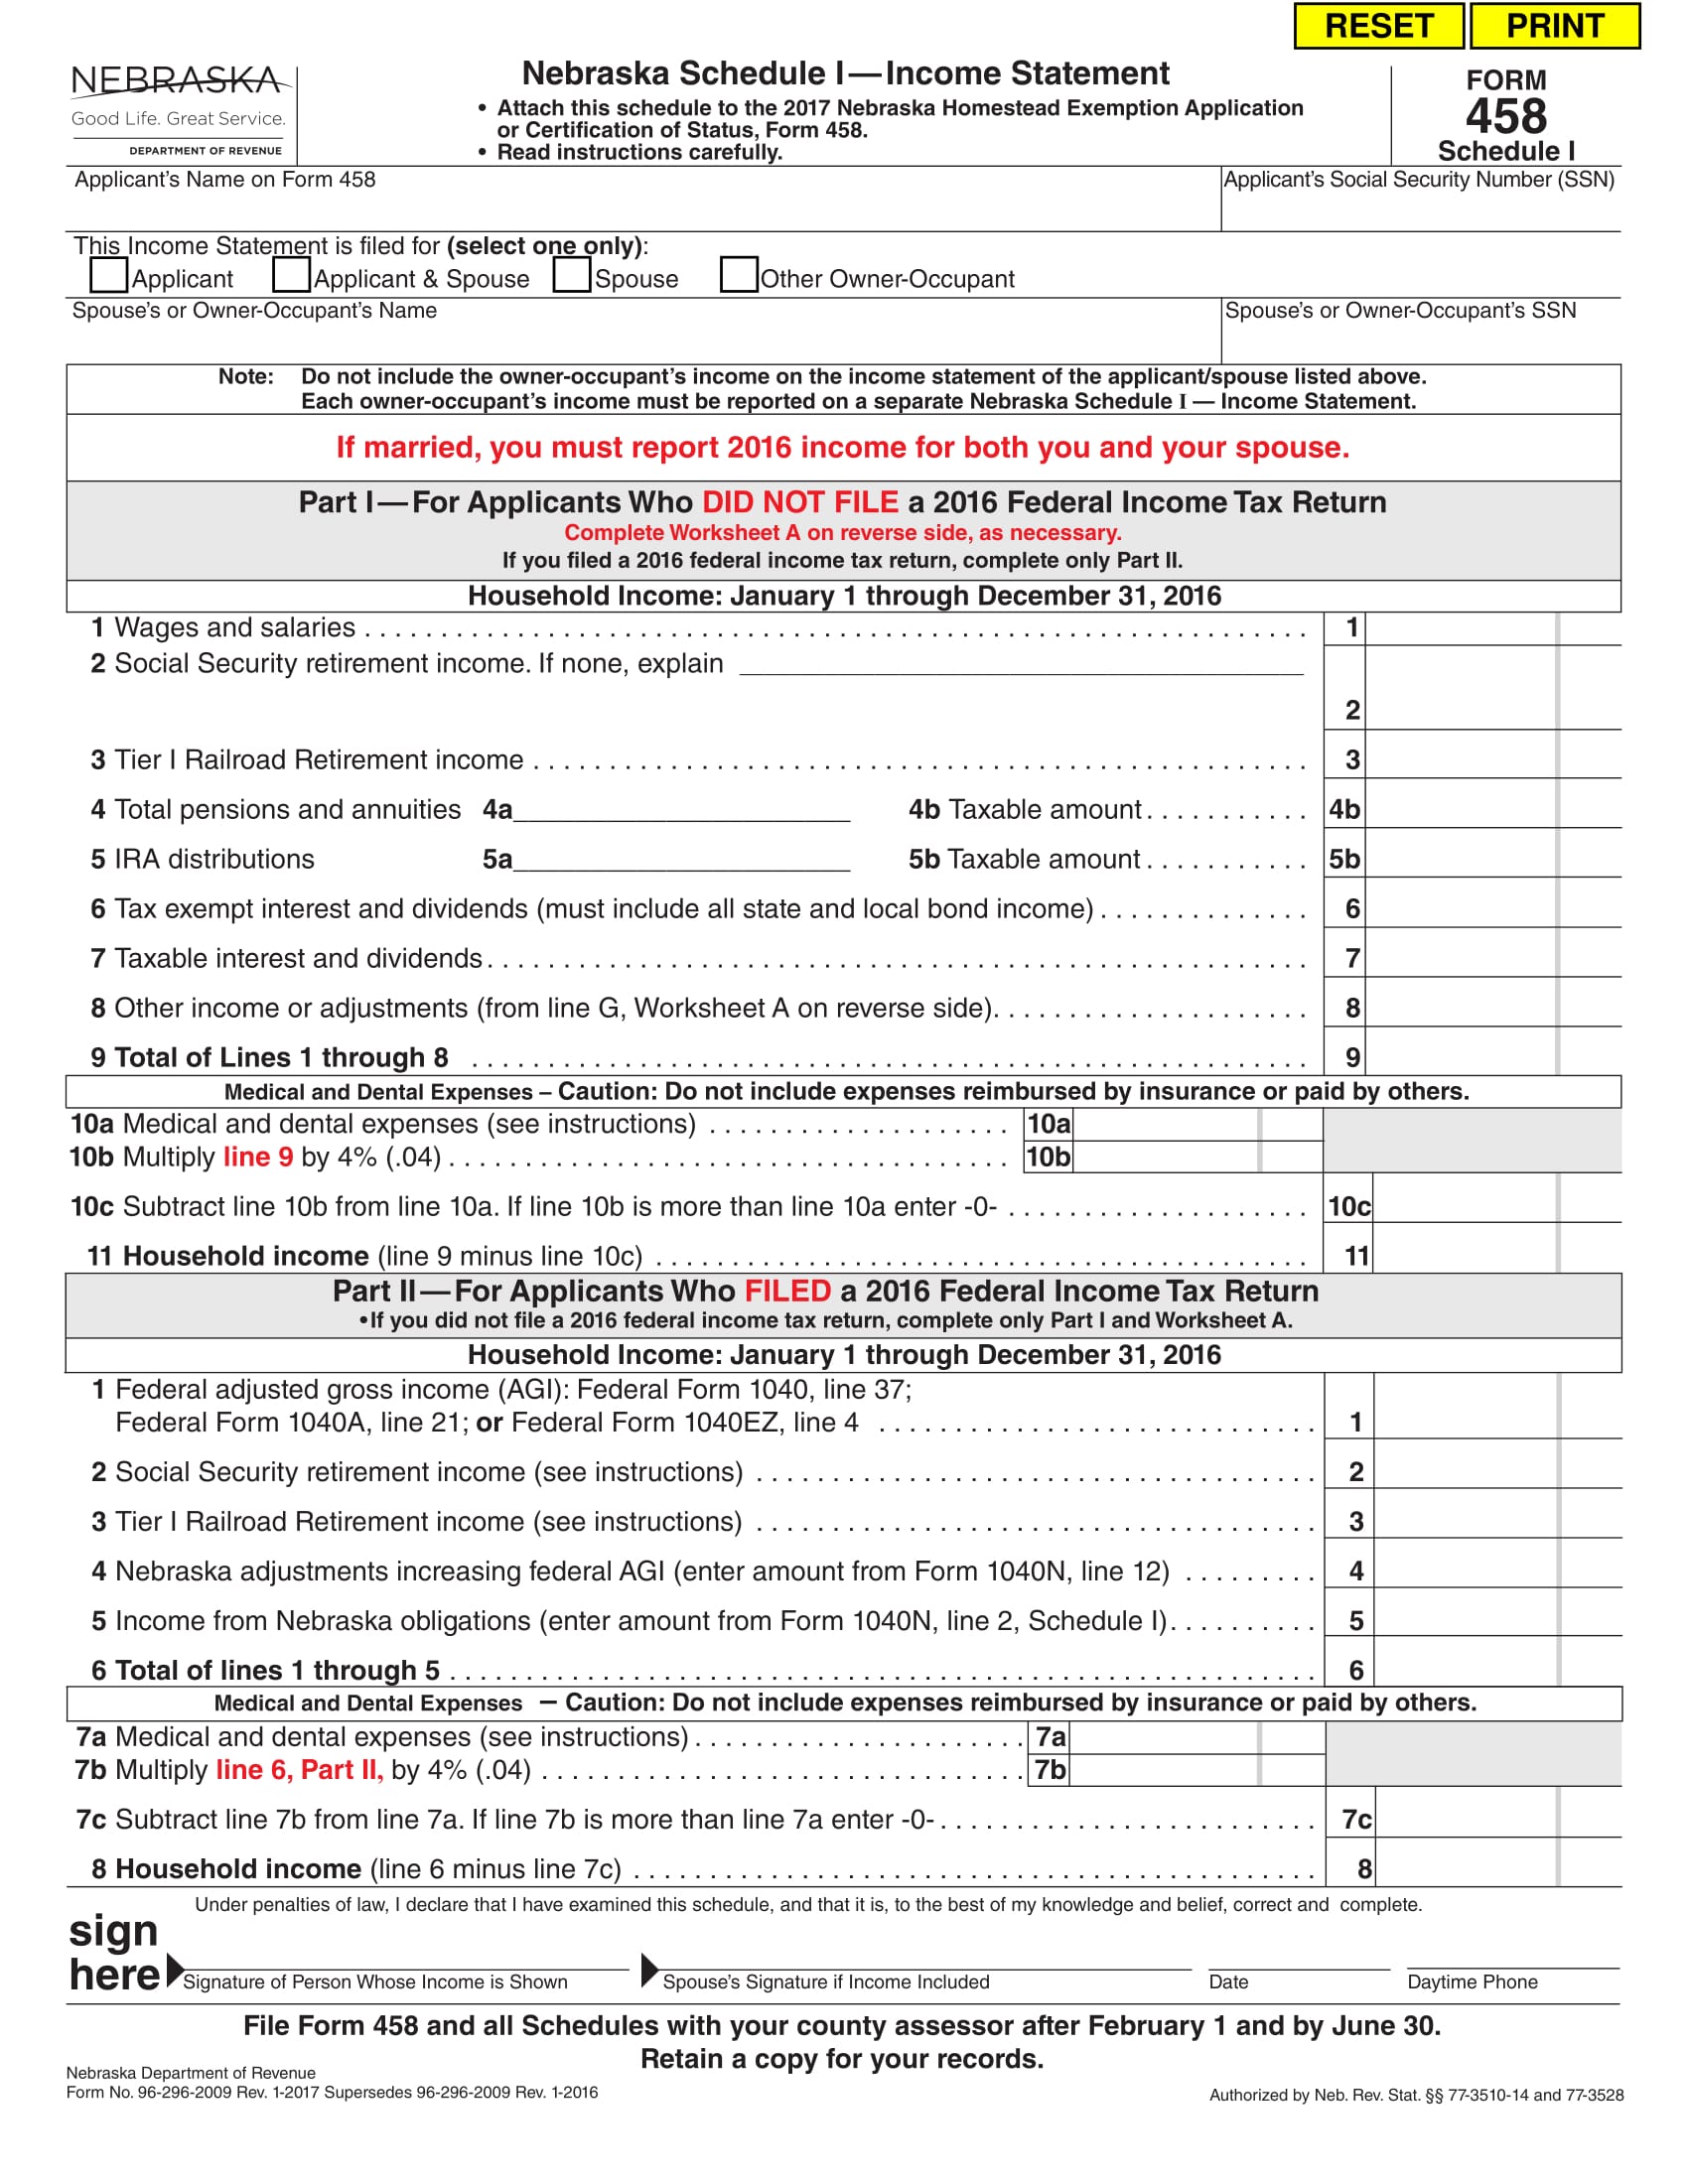 taxpayers income statement form 1